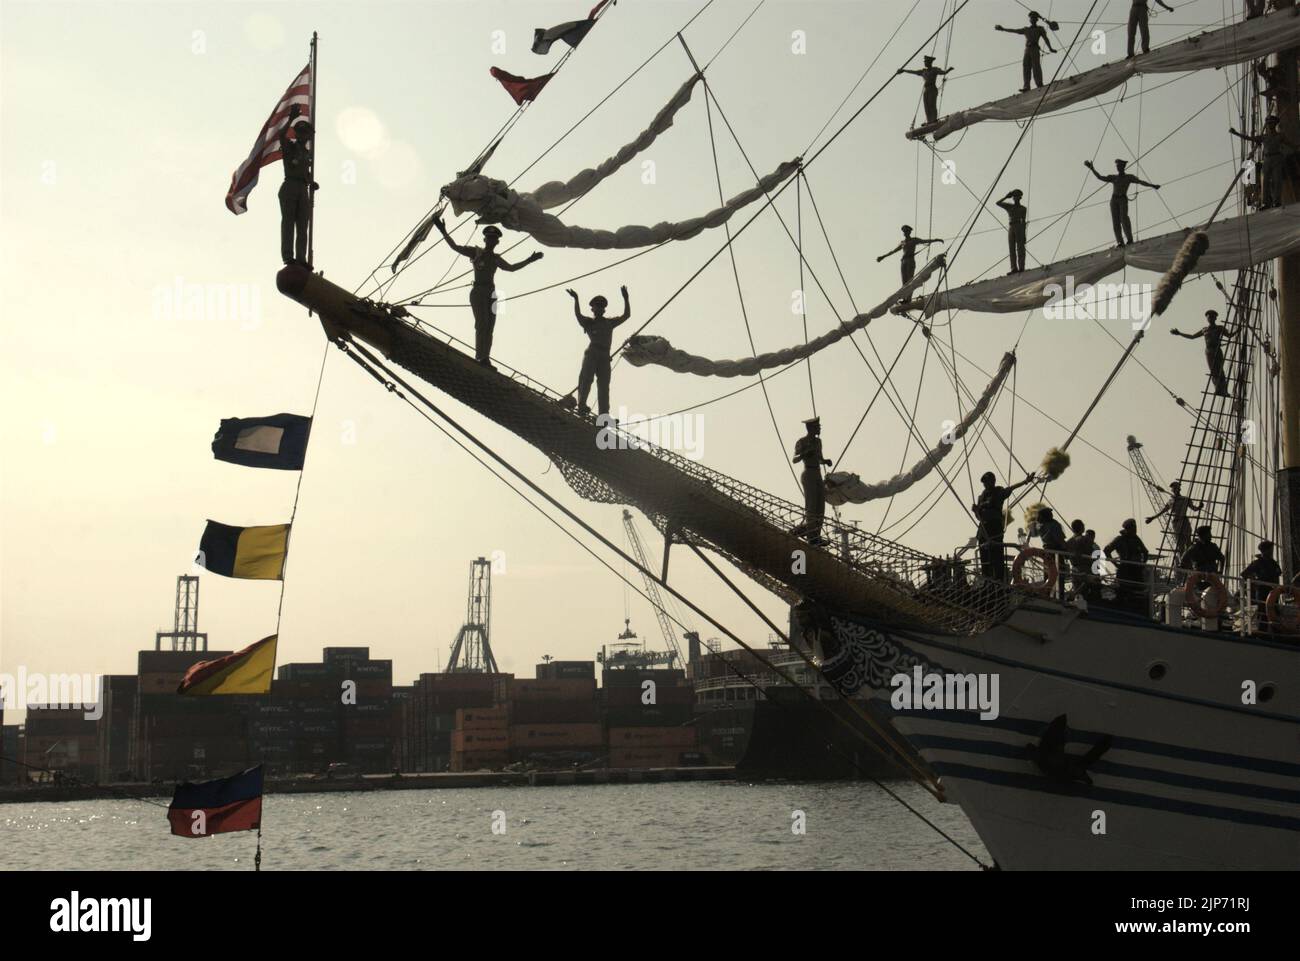 Indonesian navy cadets waving goodbye as KRI Dewaruci (Dewa Ruci), an Indonesian tall ship, is setting up a sail after the barquentine type schooner being opened for public visitors at Kolinlamil harbour (Navy harbour) in Tanjung Priok, North Jakarta, Jakarta, Indonesia. Stock Photo